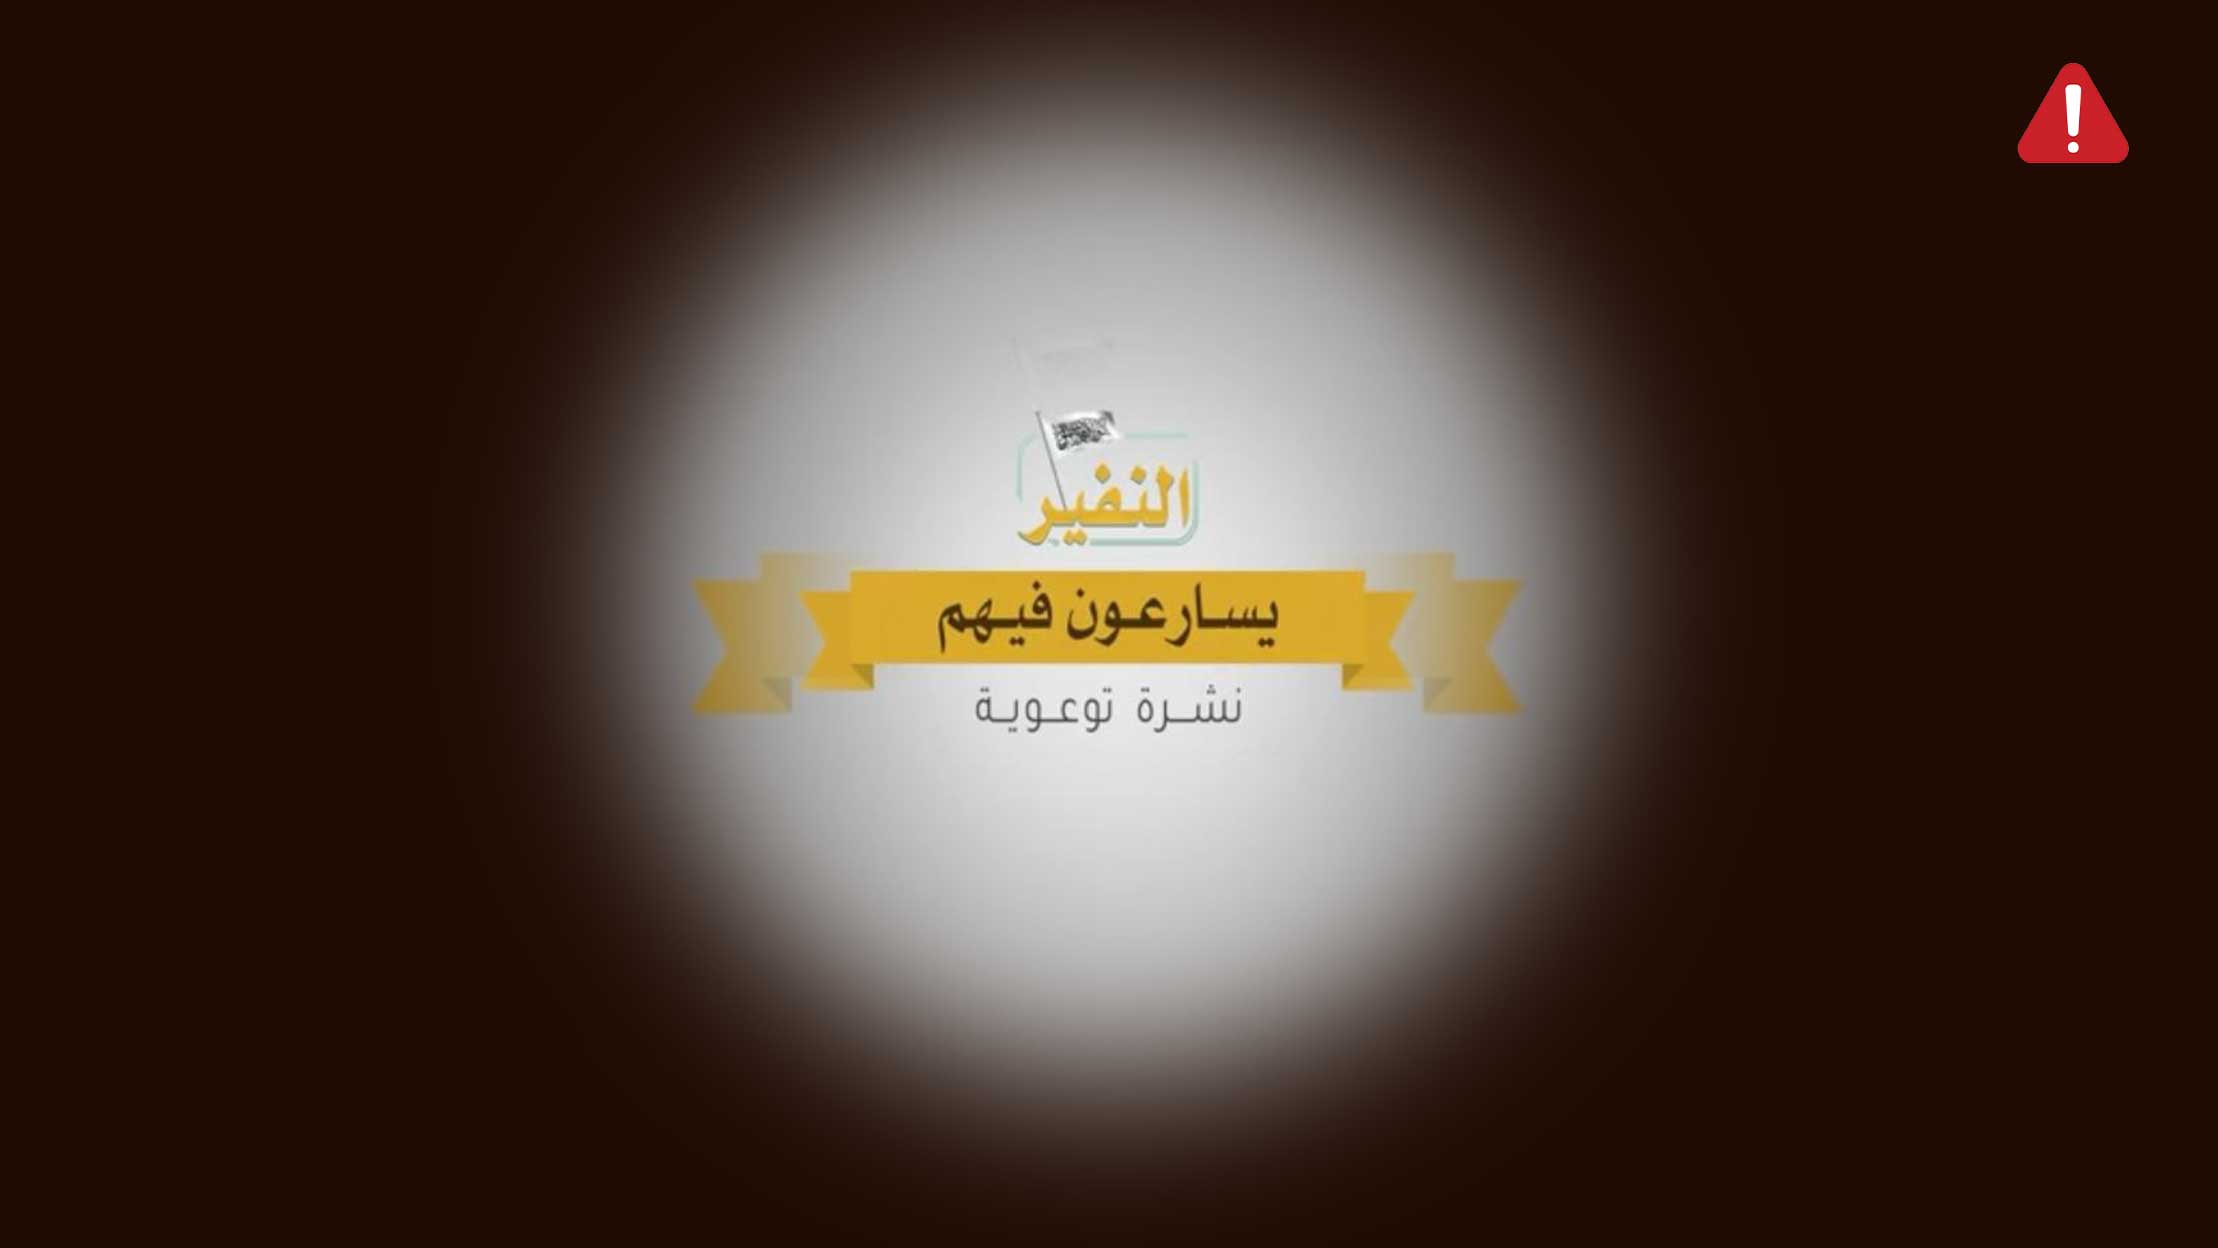 TKD MONITORING: New Video from Al-Qaida Criticises Arab Countries and Pakistan on the Conflict in Gaza